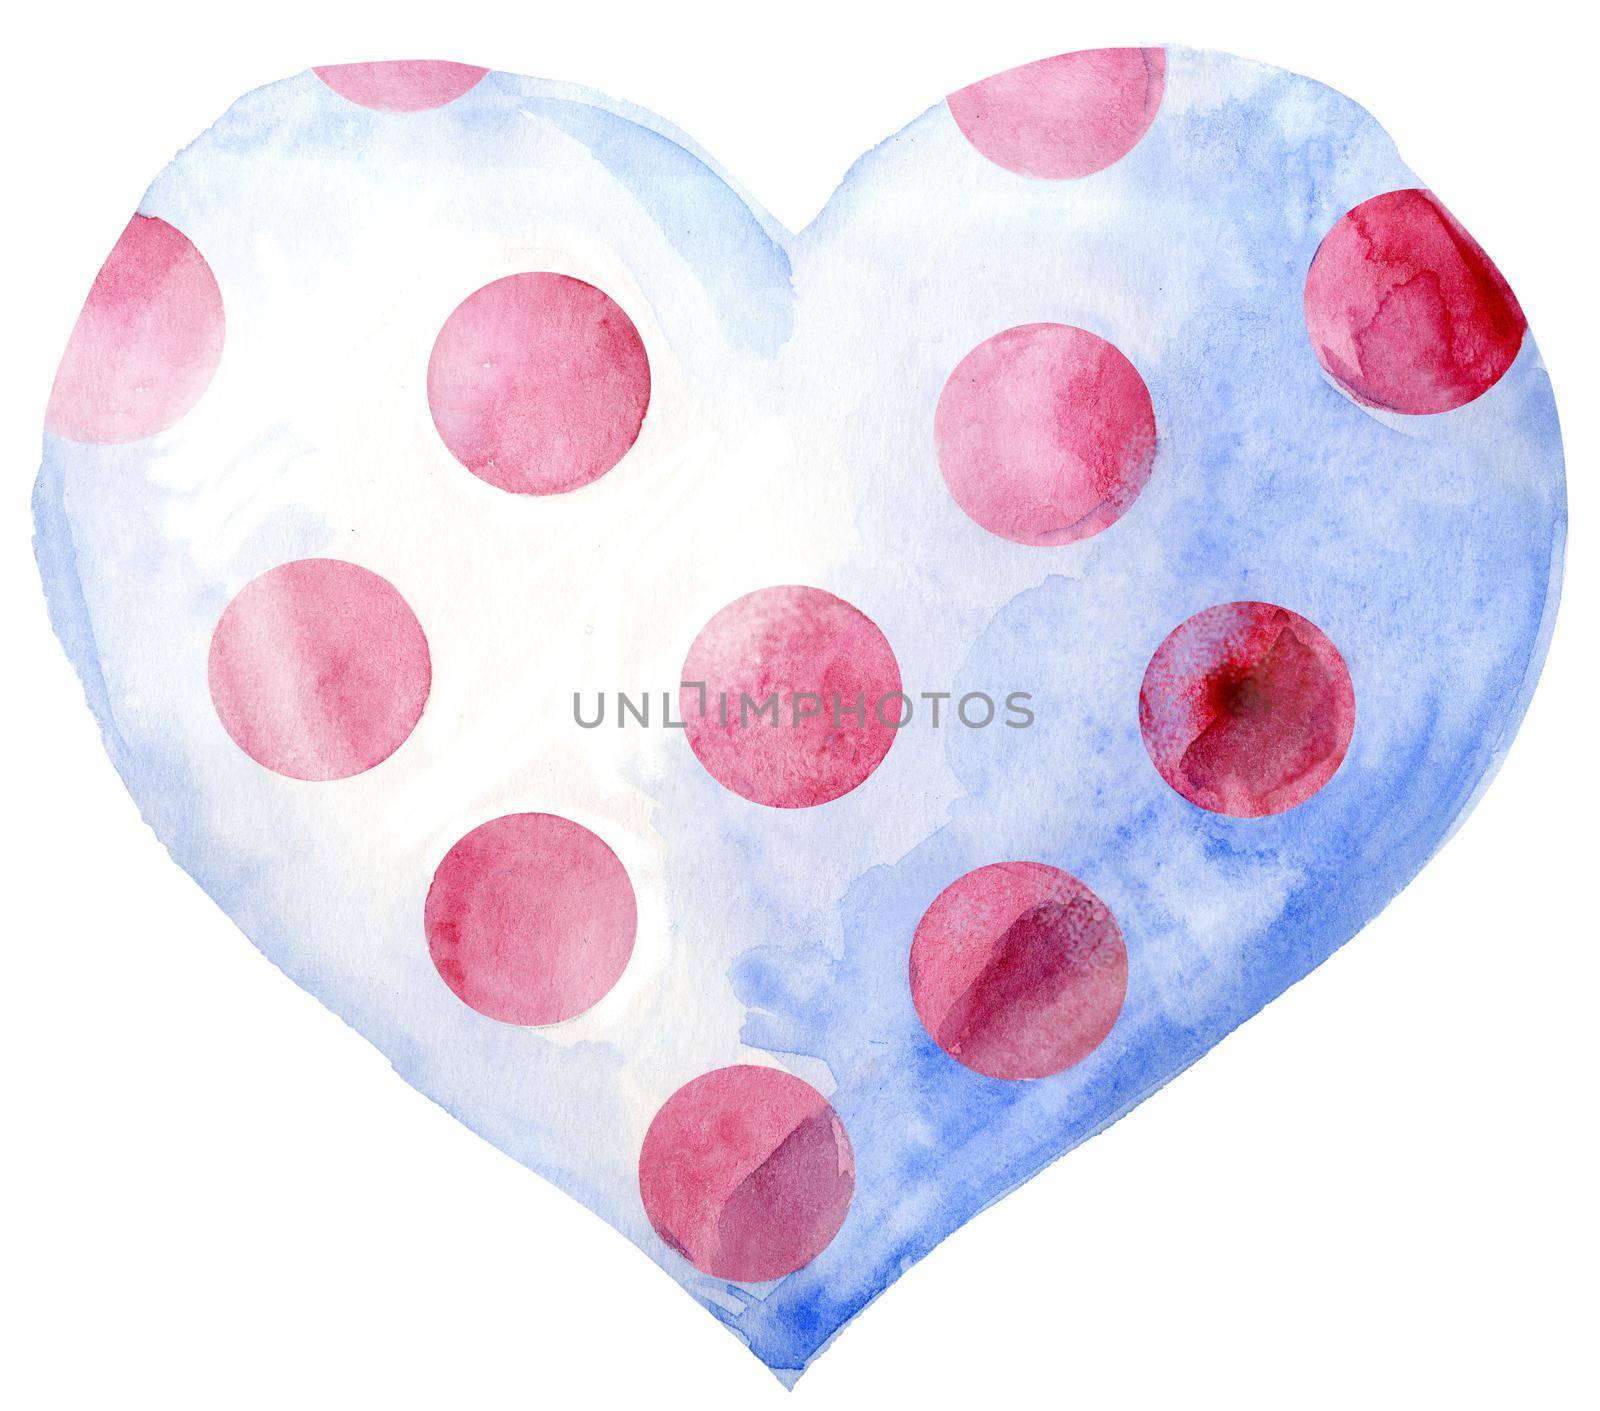 Watercolor white heart with pink polka dots on a white background.